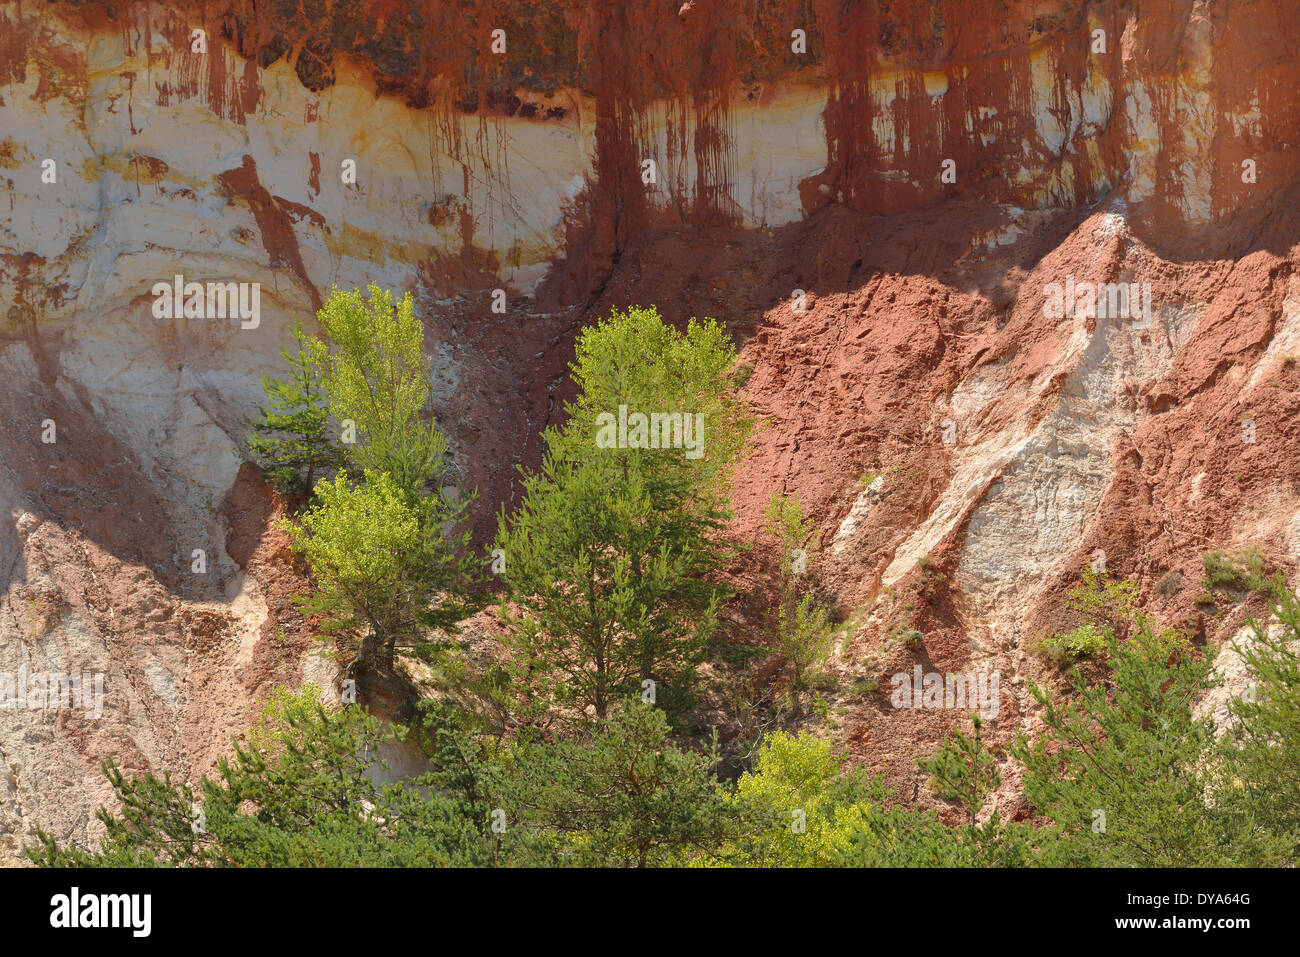 Europe, Roussillon, Vaucluse, Provence, France, ochre, rock, red, cliff, nature Stock Photo